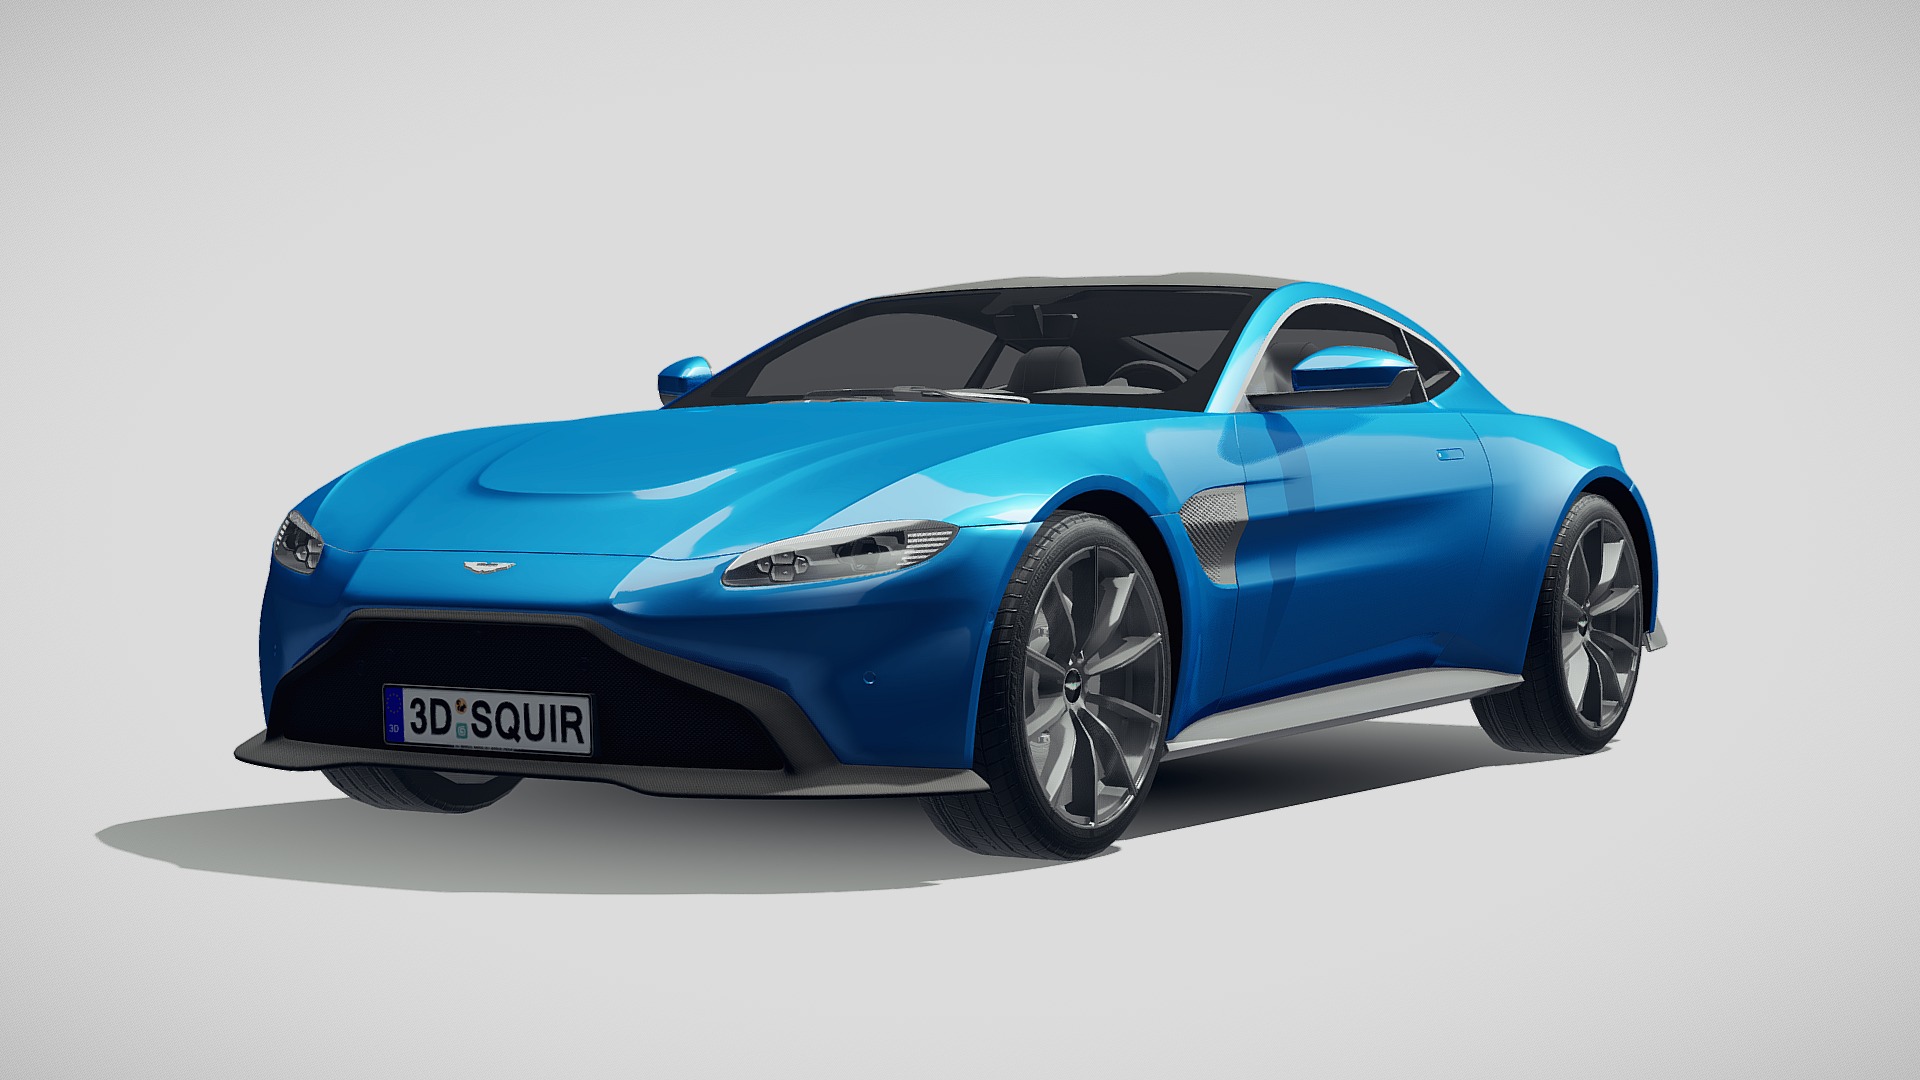 3D model LowPoly Aston Martin Vantage 2019 - This is a 3D model of the LowPoly Aston Martin Vantage 2019. The 3D model is about a blue sports car.